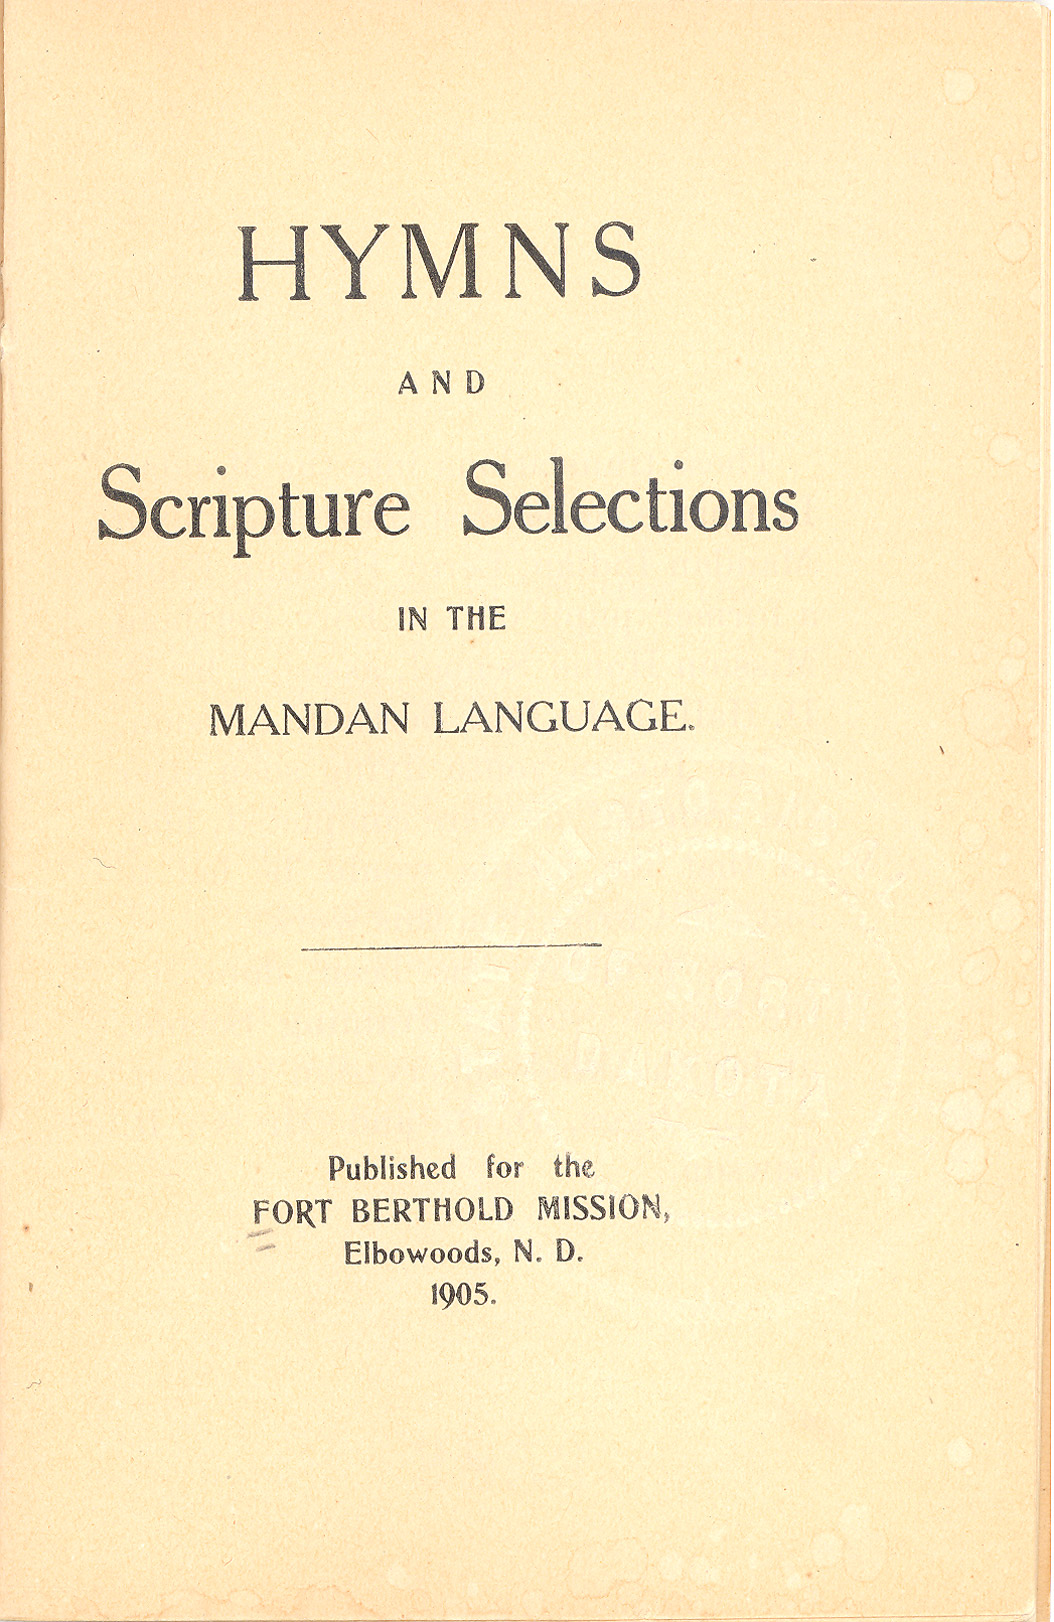 Mandan Hymns. Mandans learned traditional Christian hymns and prayers in translations by Reverend C. L. Hall. Hall studied the languages of the people of Fort Berthold and eventually came to understand the languages well enough to translate hymns into each of the three languages of Fort Berthold. 